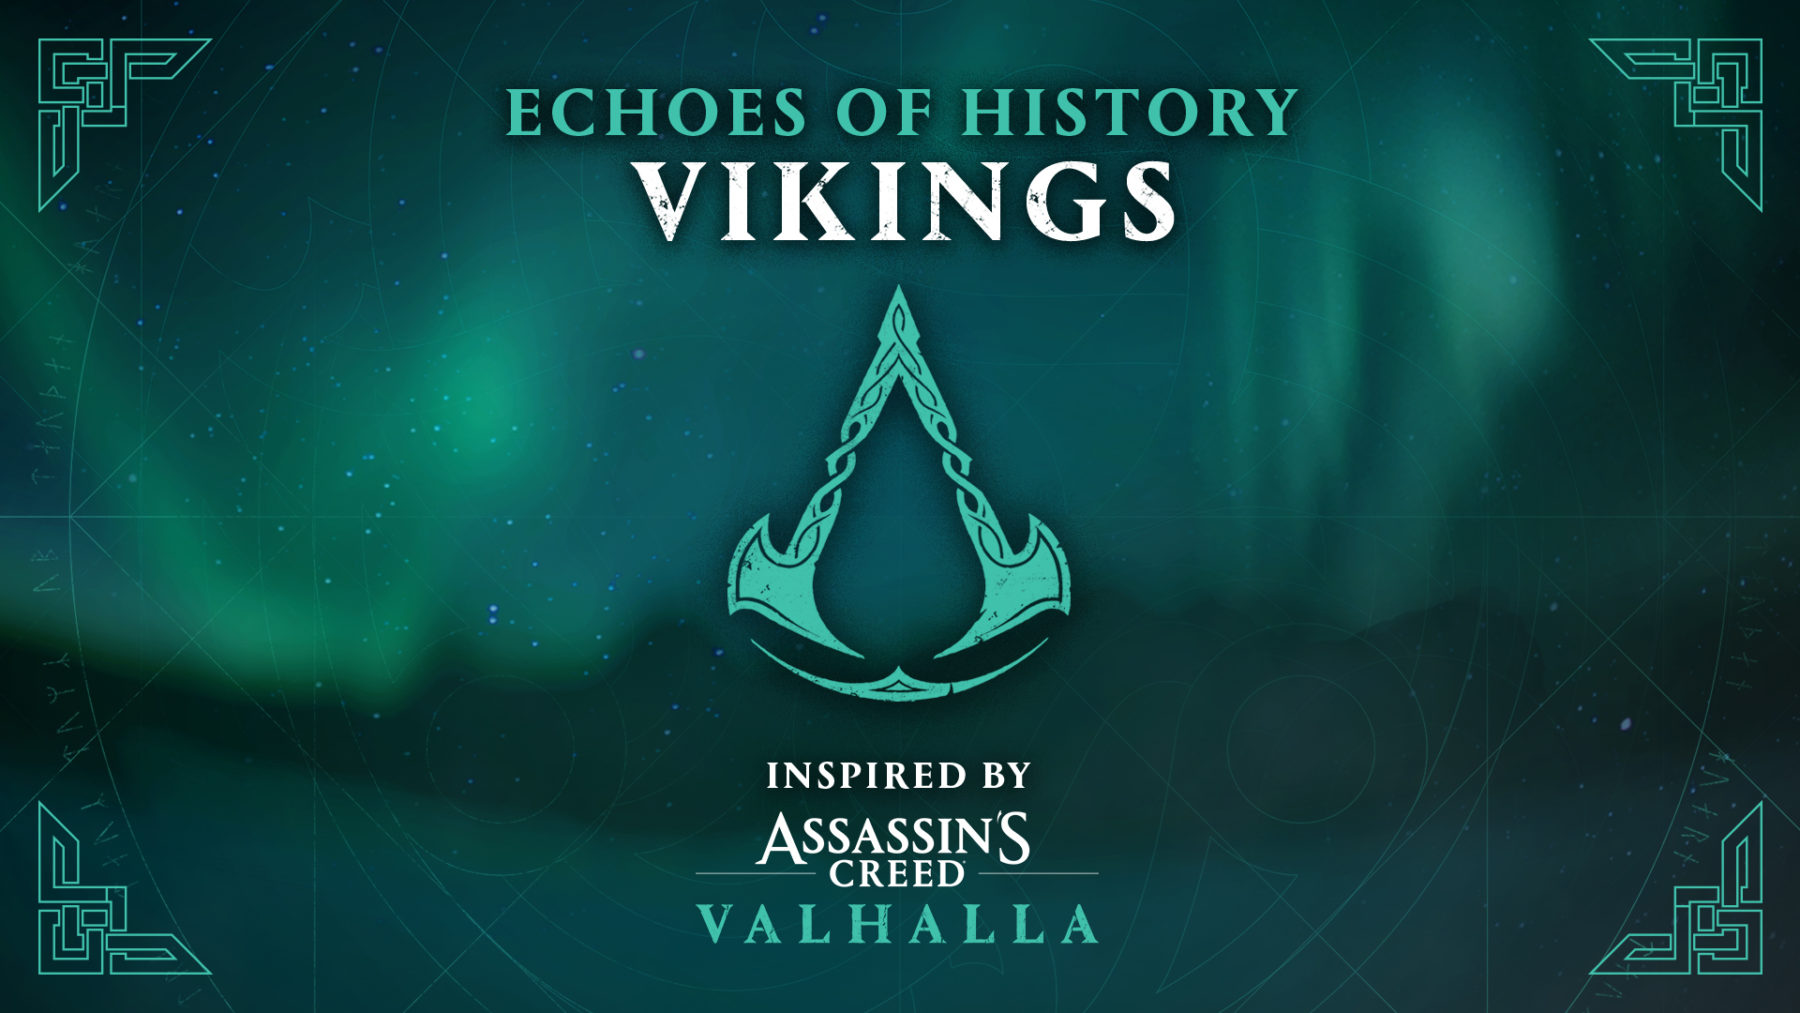 Assassin’s Creed ‘Echoes of History’ Podcast Explores Norse Gods Saga - returnal